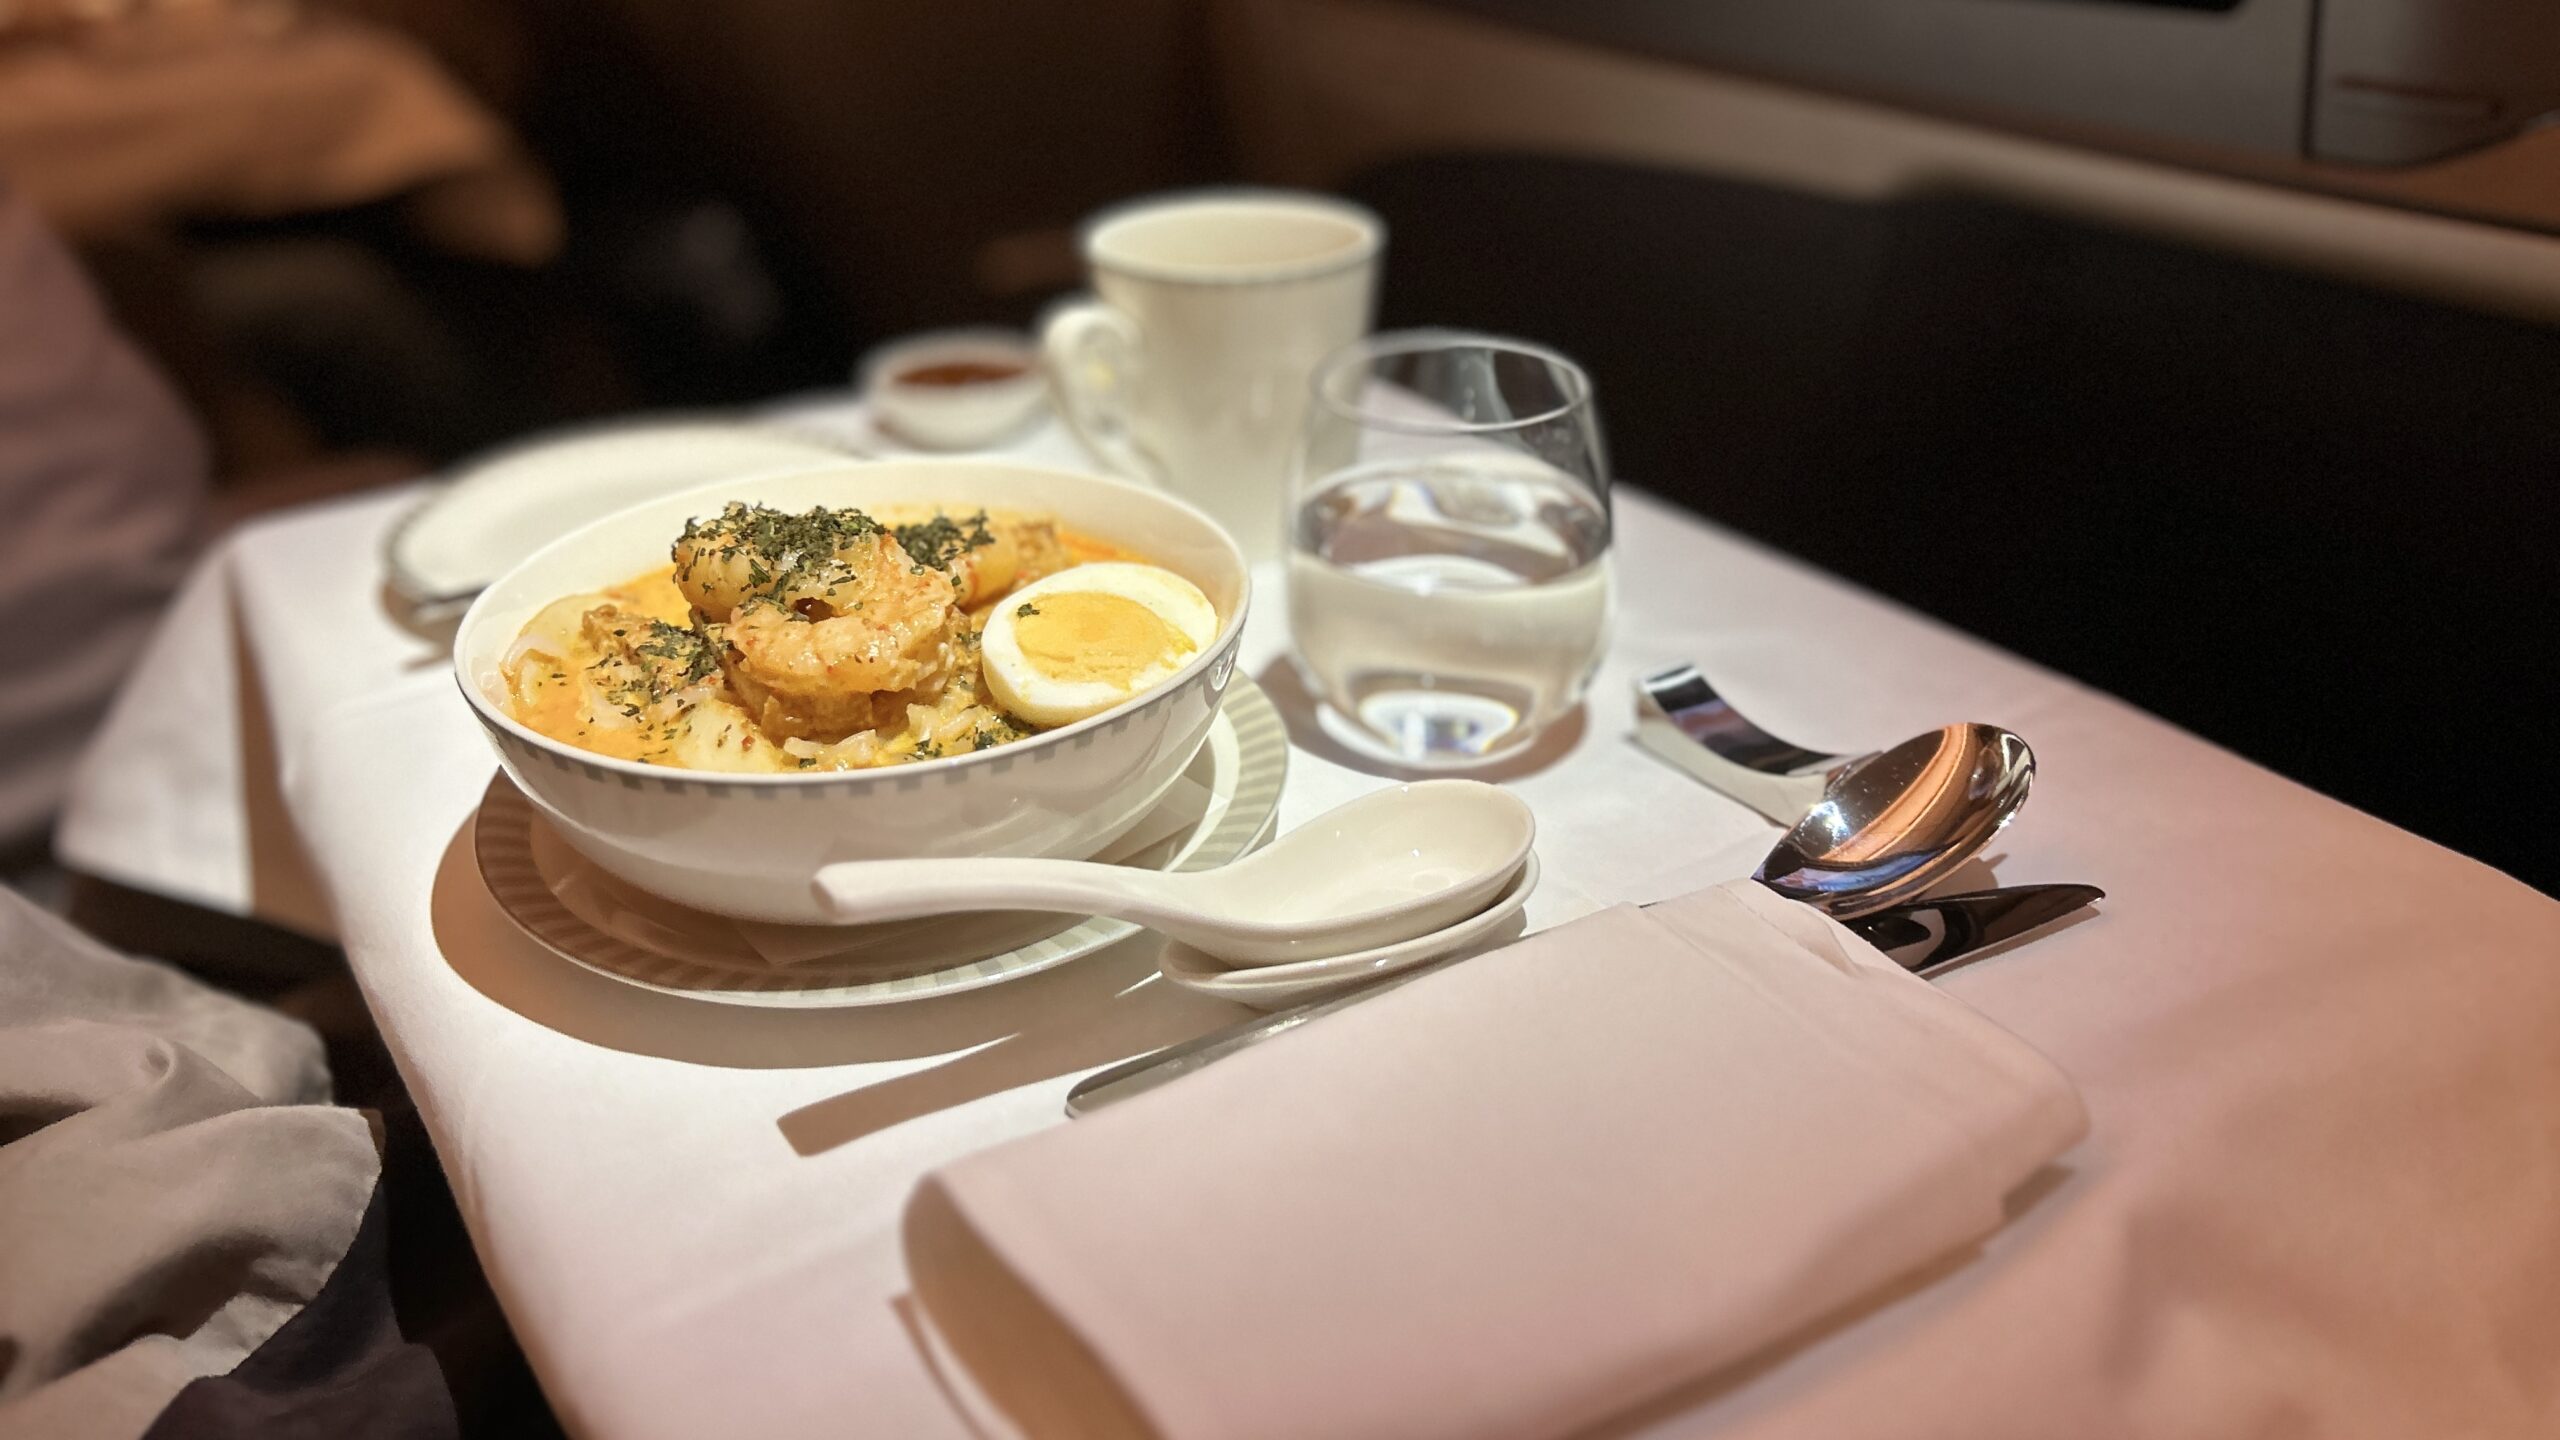 Singapore Airlines A350 Business Class Singapore to Brussels Book the Cook Point Hacks by Daniel Sciberras